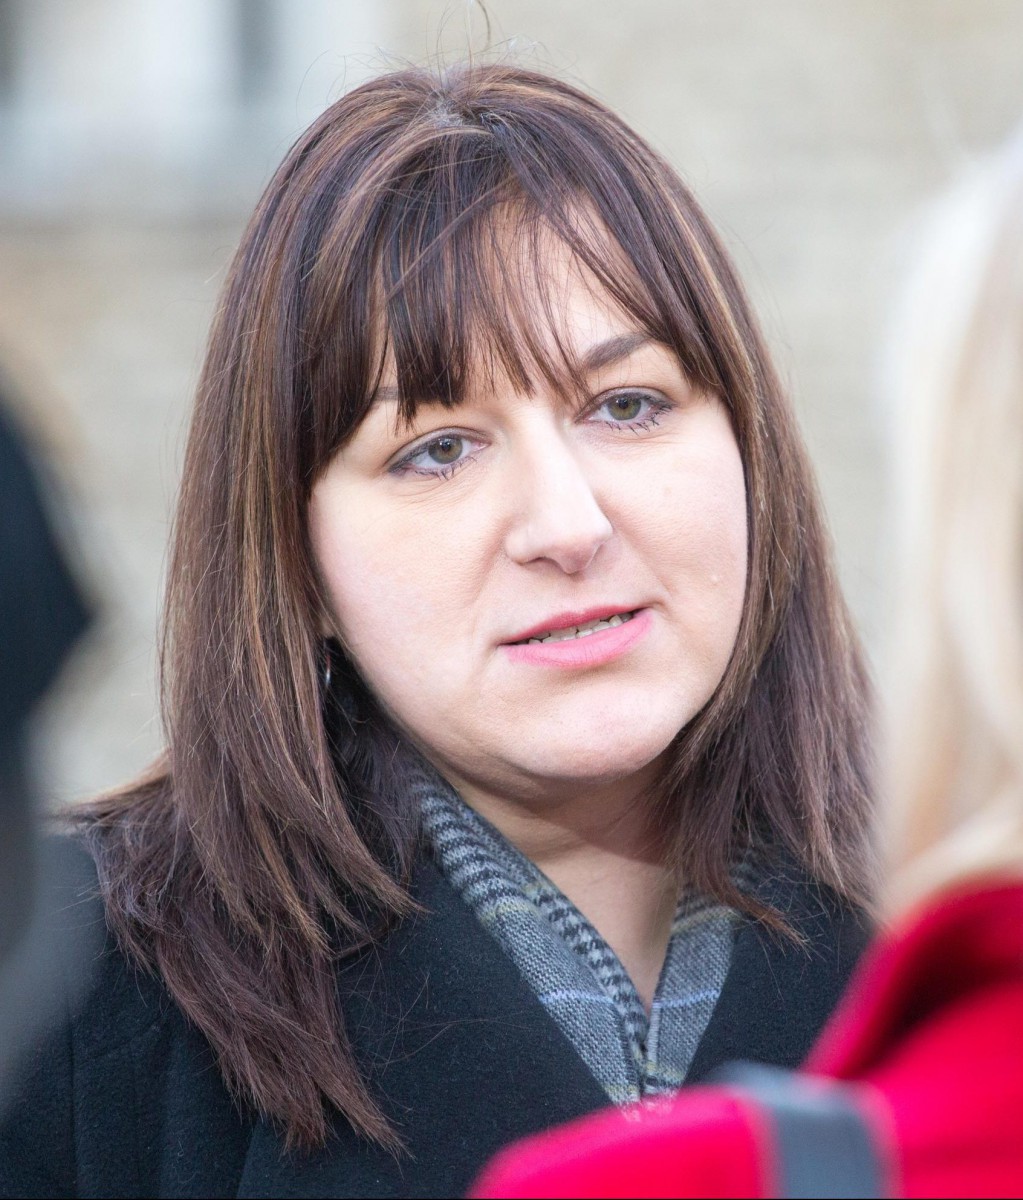 Jewish Labour MP Ruth Smeeth was bombarded with anti-Semitic messages